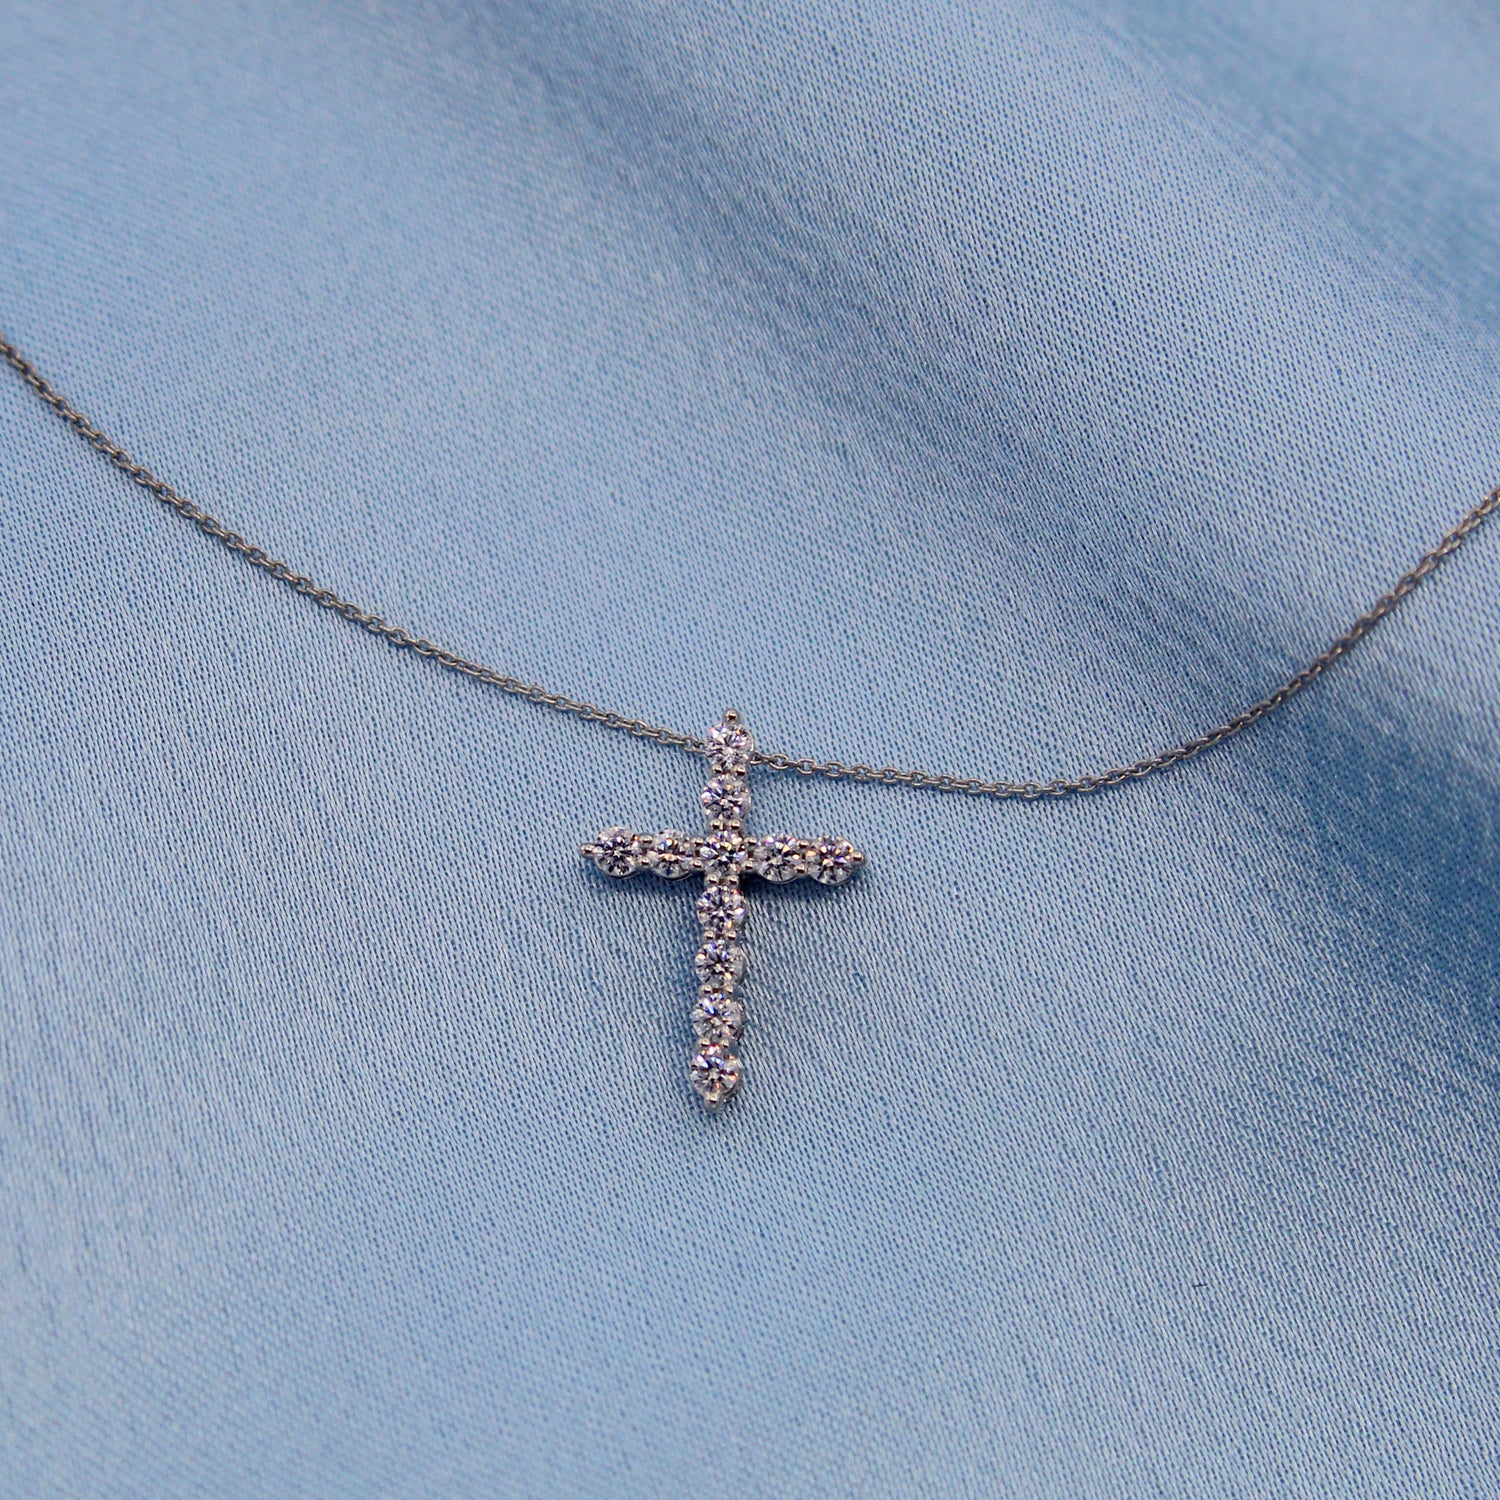 cross diamond natural pendant necklace jewelry affordable gift birthday 